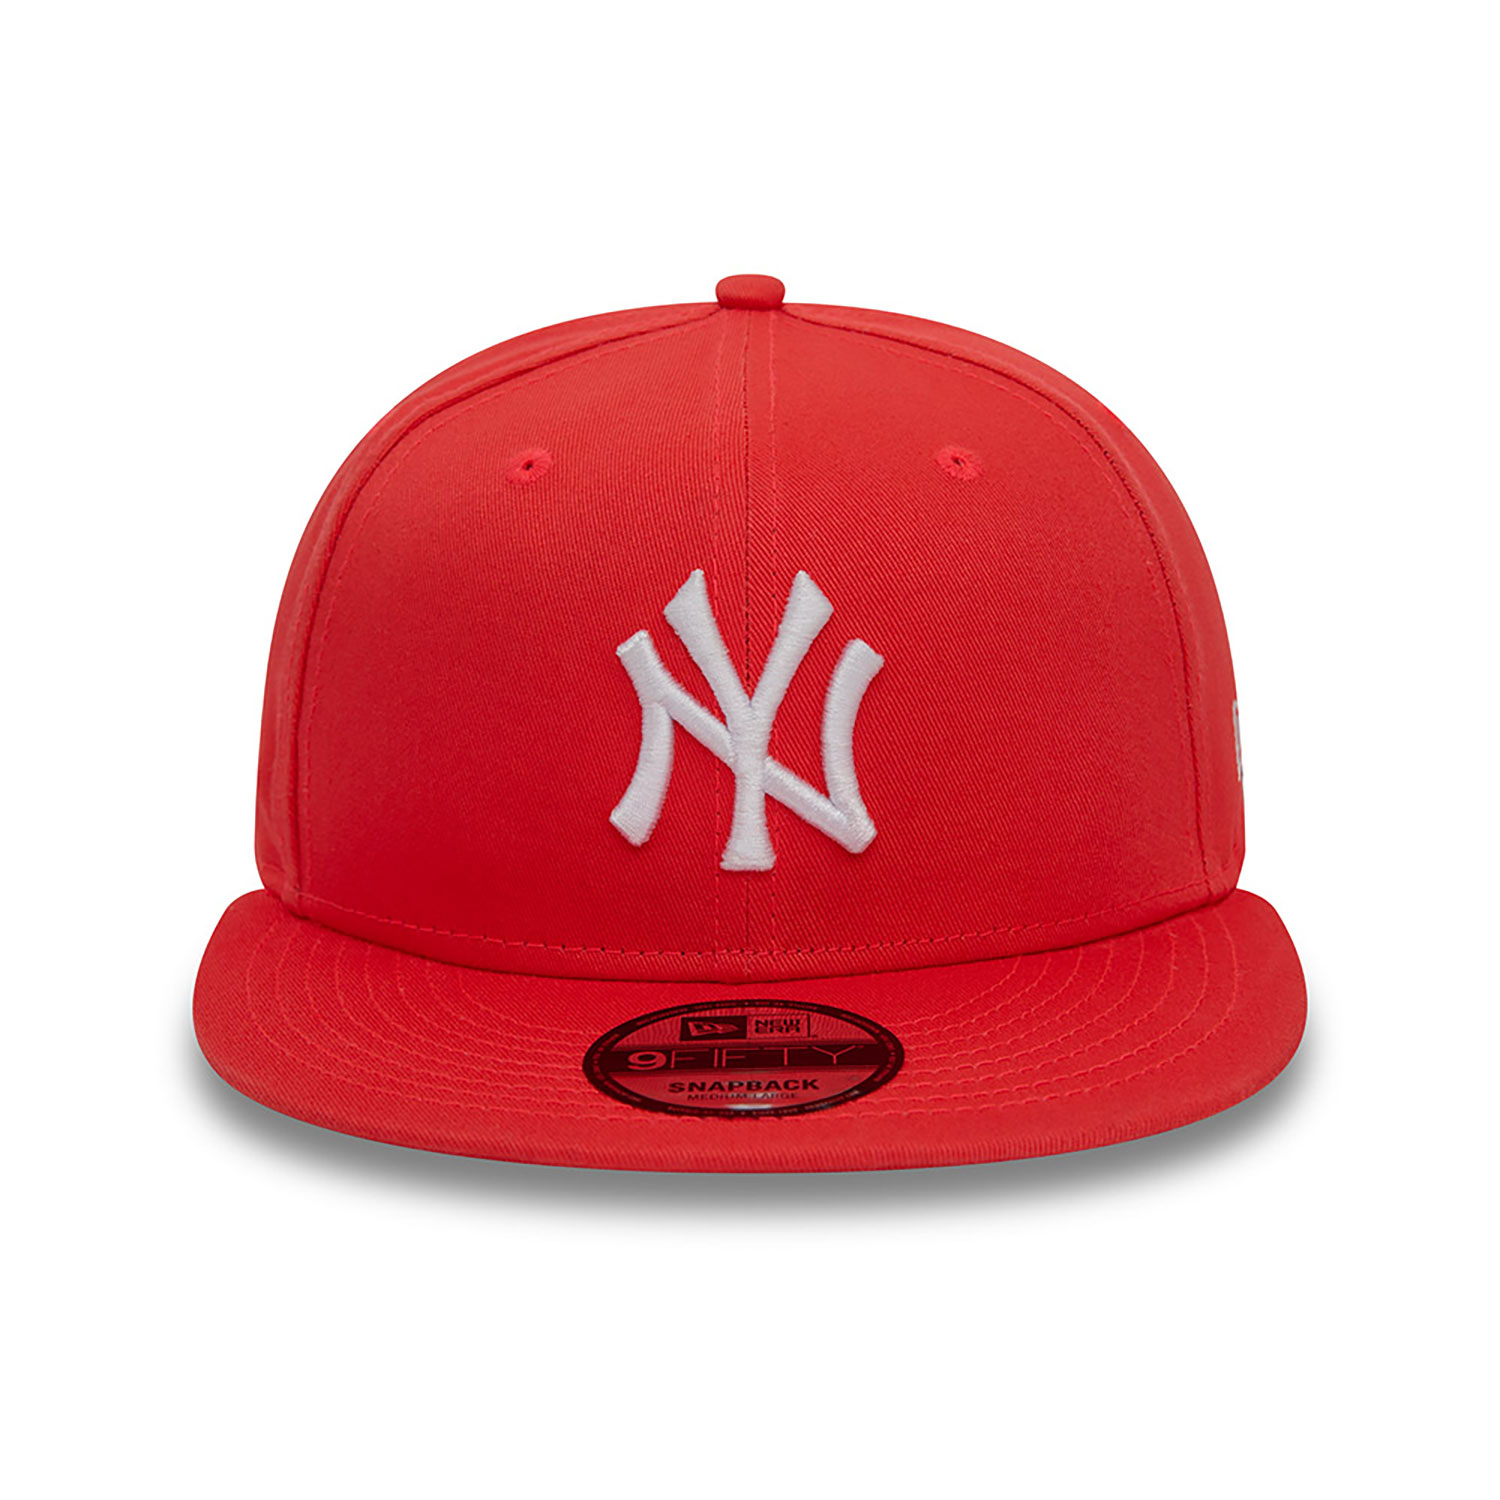 New York Yankees League Essential Red 9FIFTY Adjustable Cap